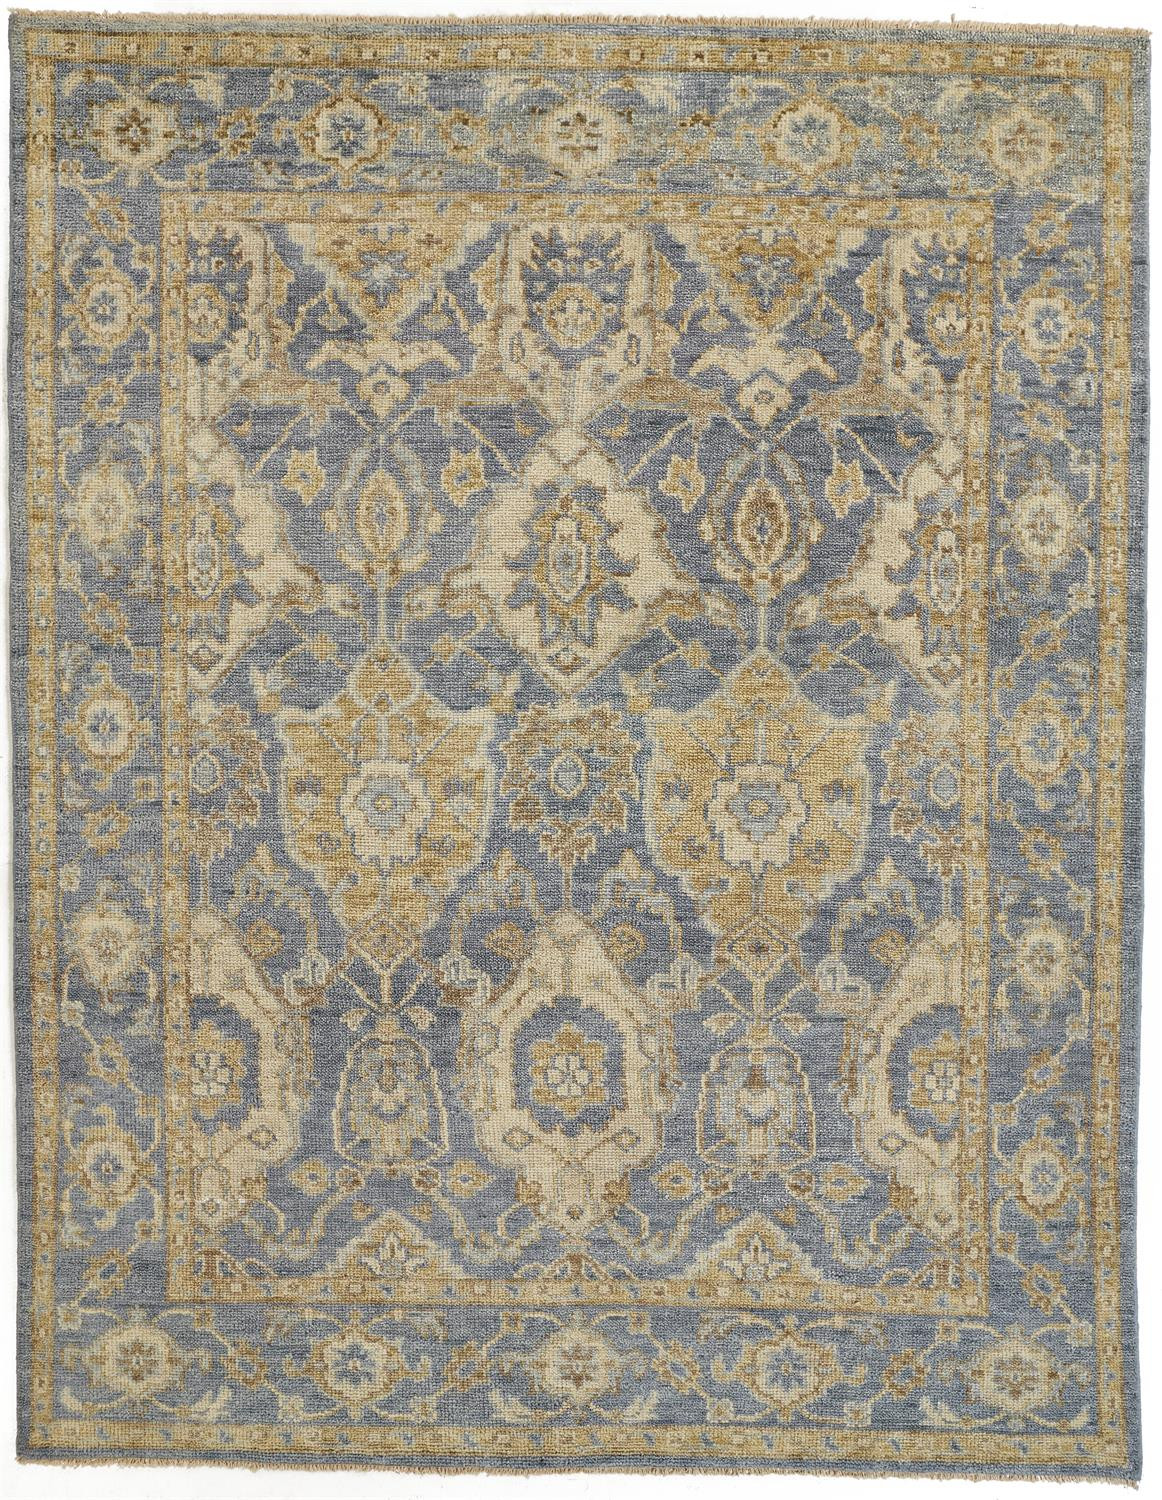 10' X 13' Blue Gold And Tan Wool Floral Hand Knotted Stain Resistant Area Rug With Fringe-512616-1